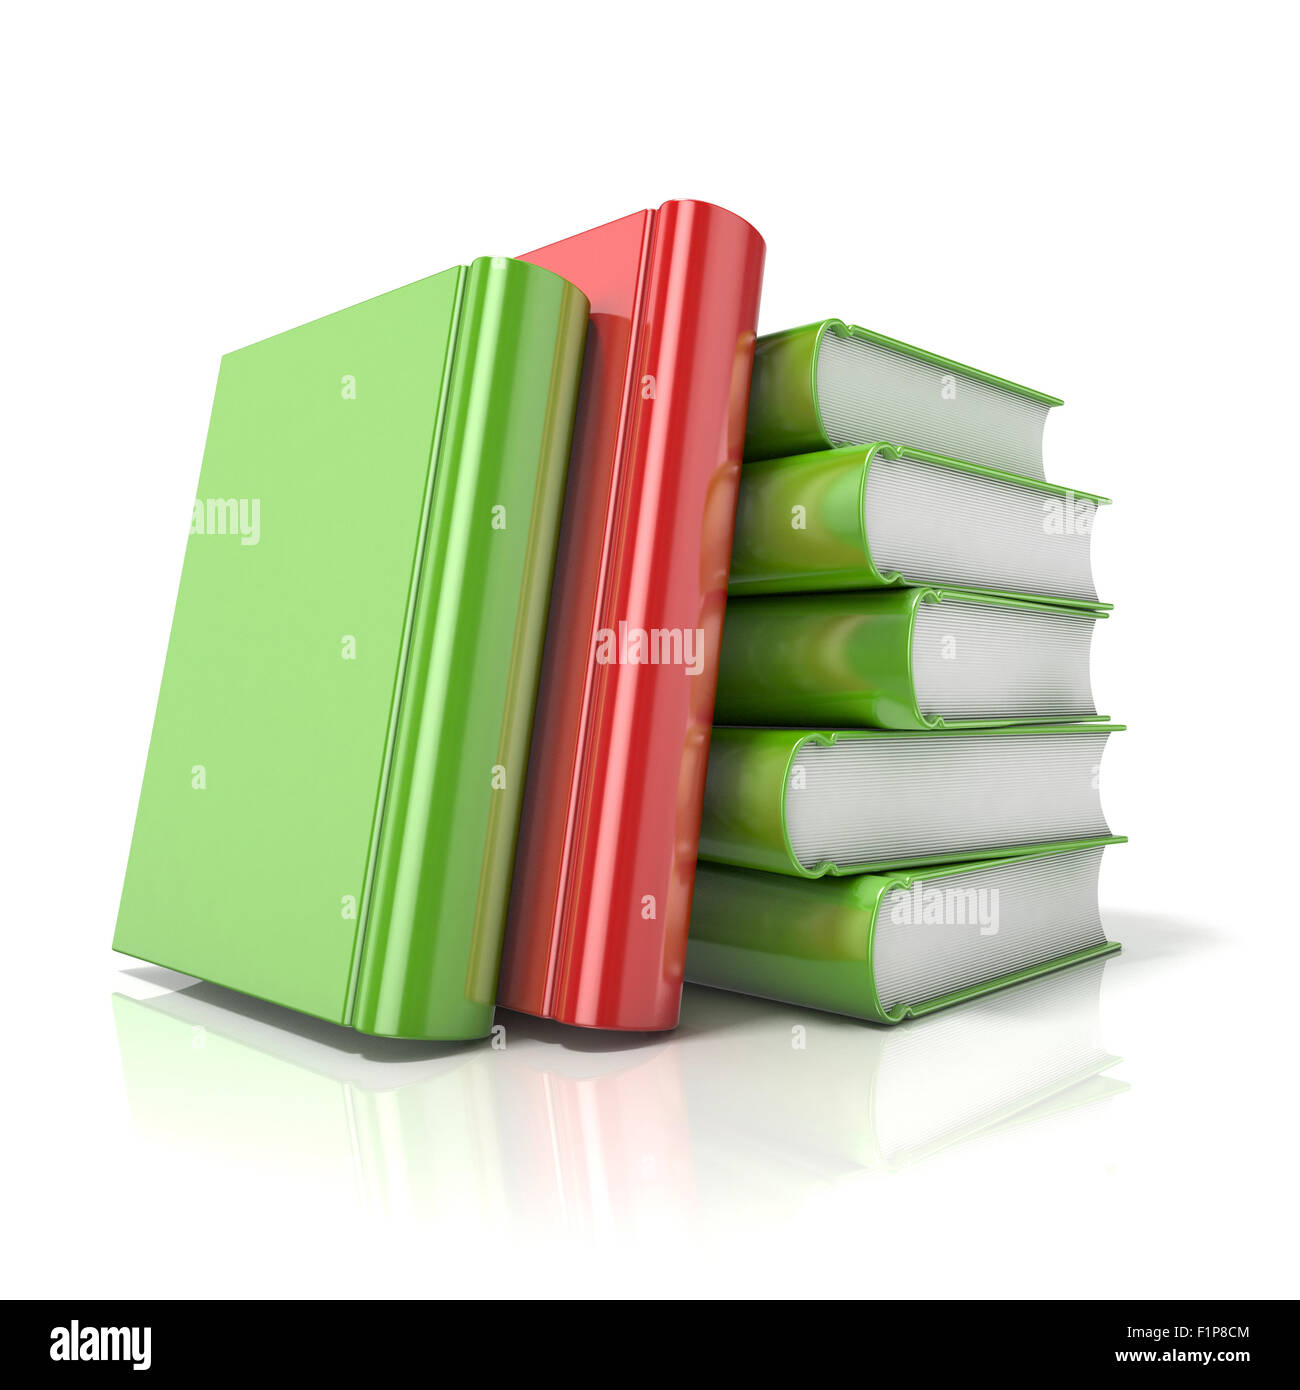 Green books with one red book. 3D render illustration isolated on white background Stock Photo